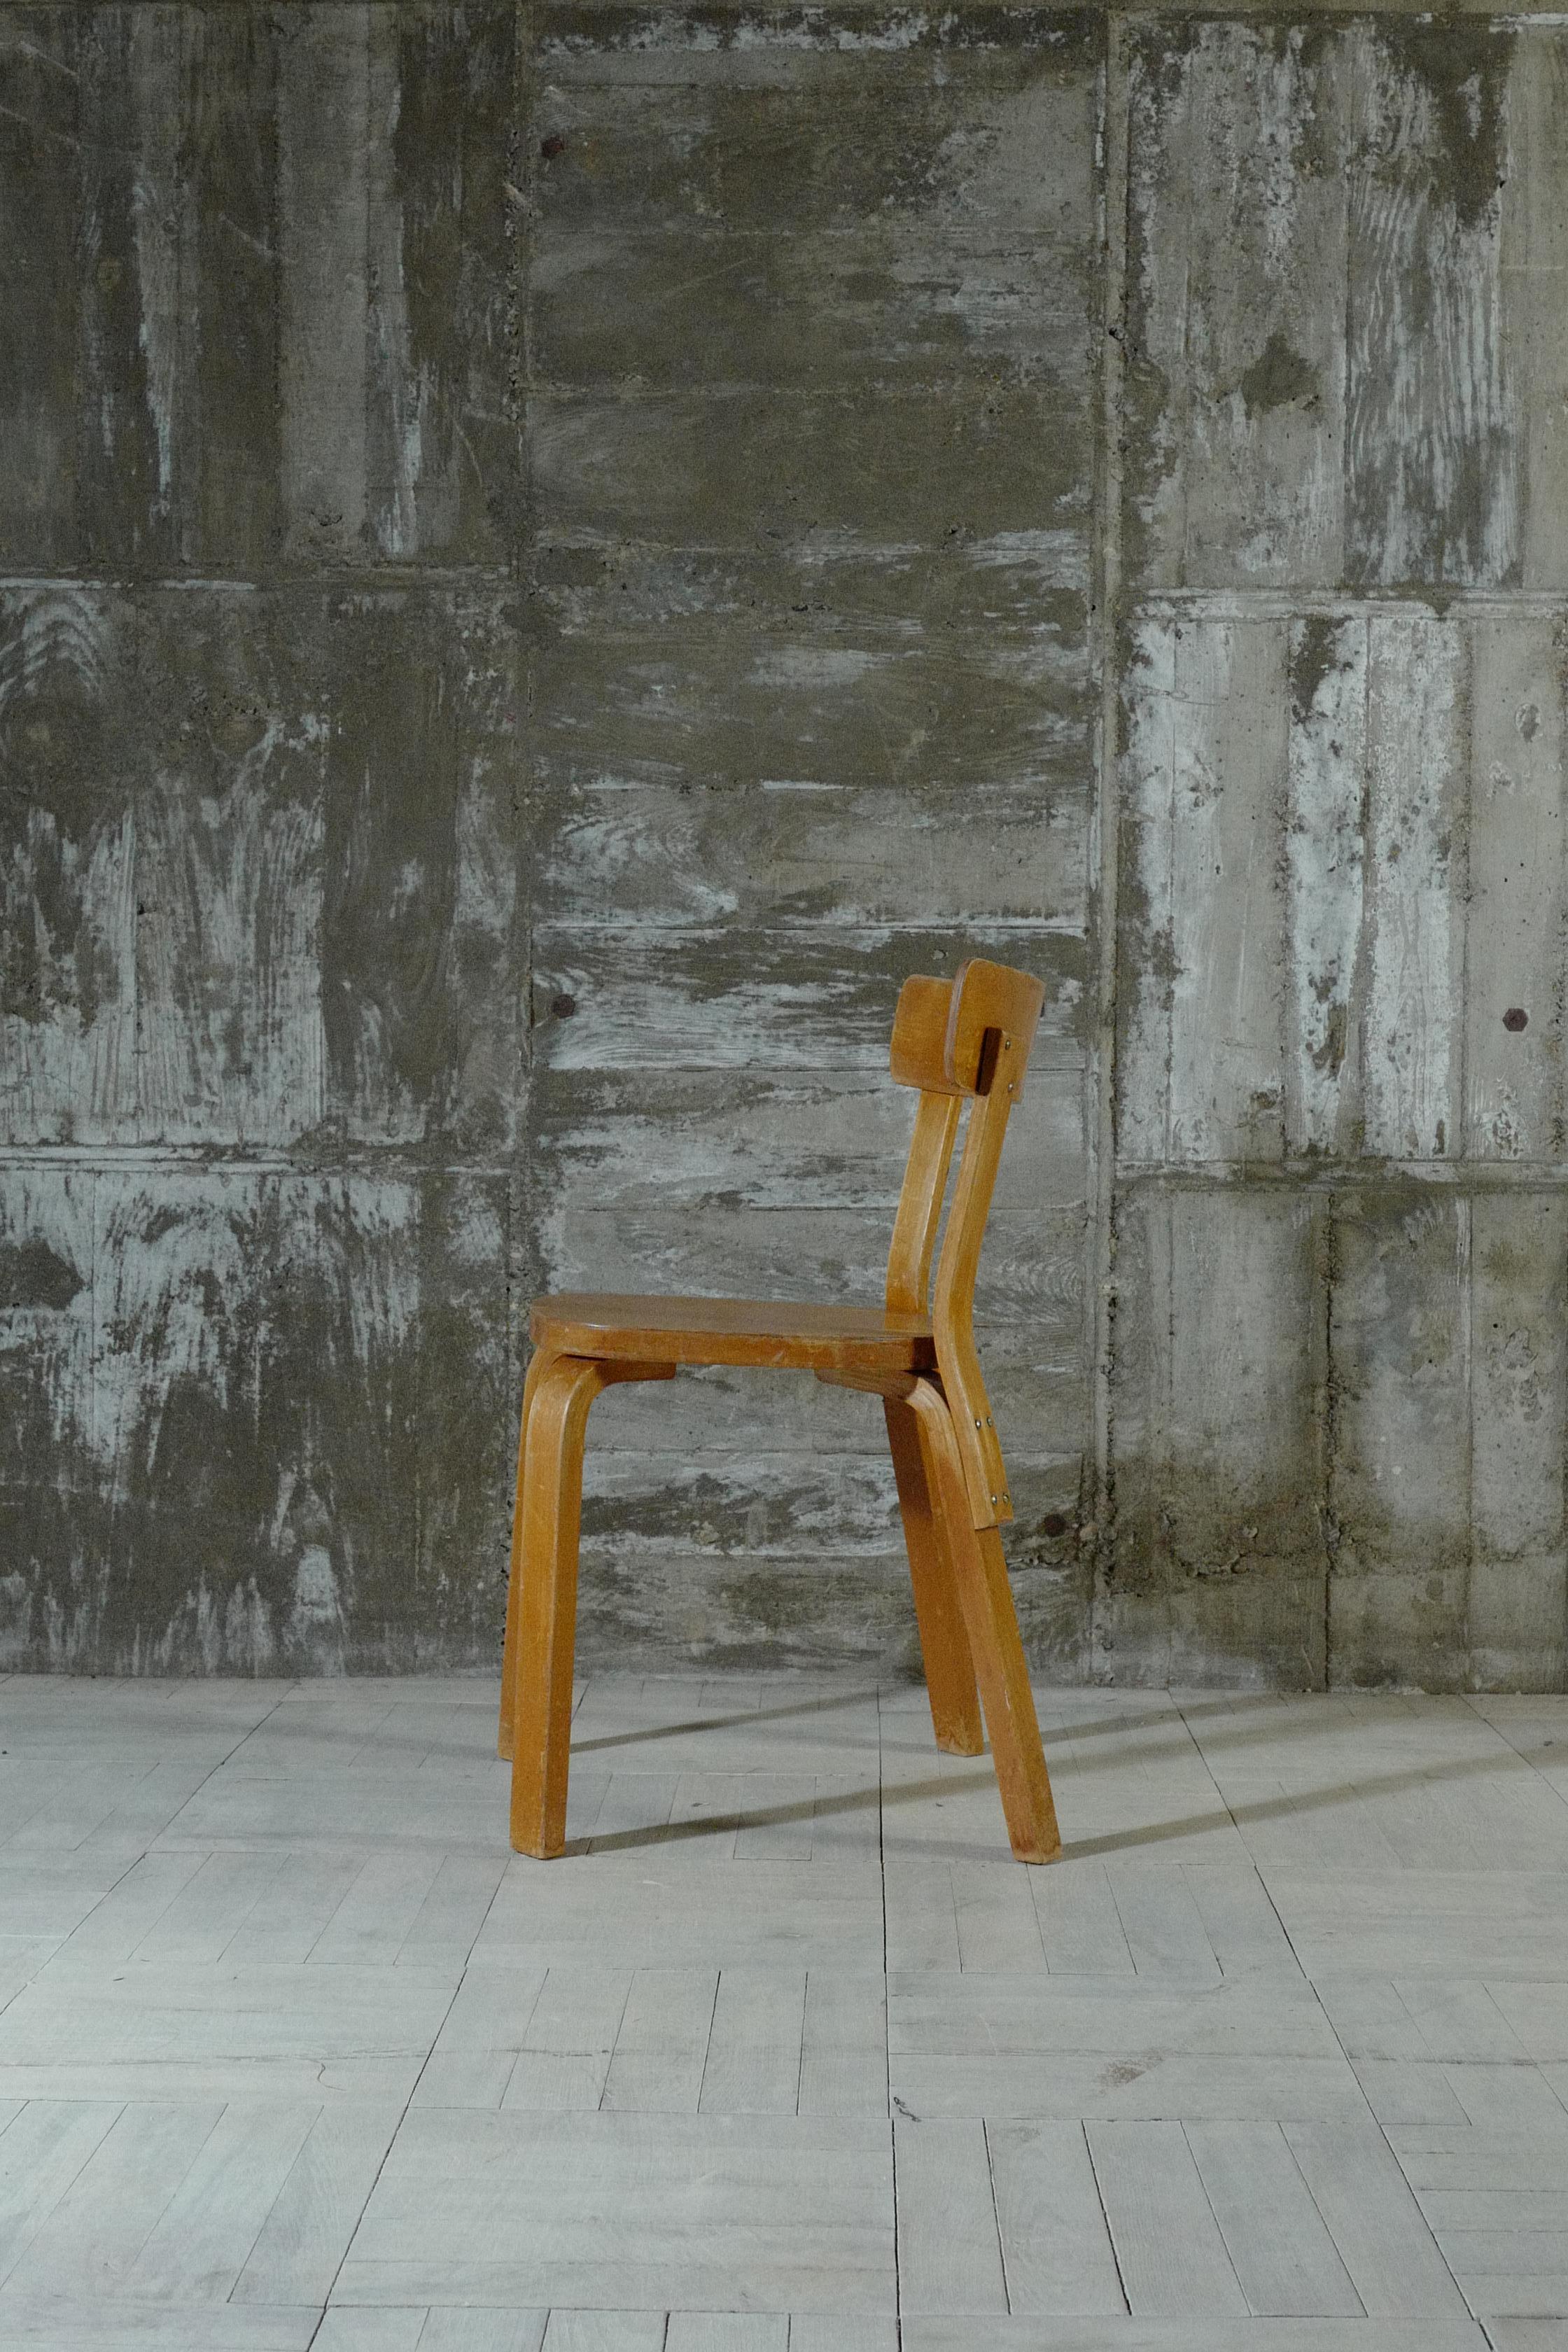 Designed by Alvar Aalto.
This chair 69 was manufactured in the 1930s.
It has a structure that seems to be an early product that is not found in current products.
The paint film from that time still remains.
There are places where the veneer on the